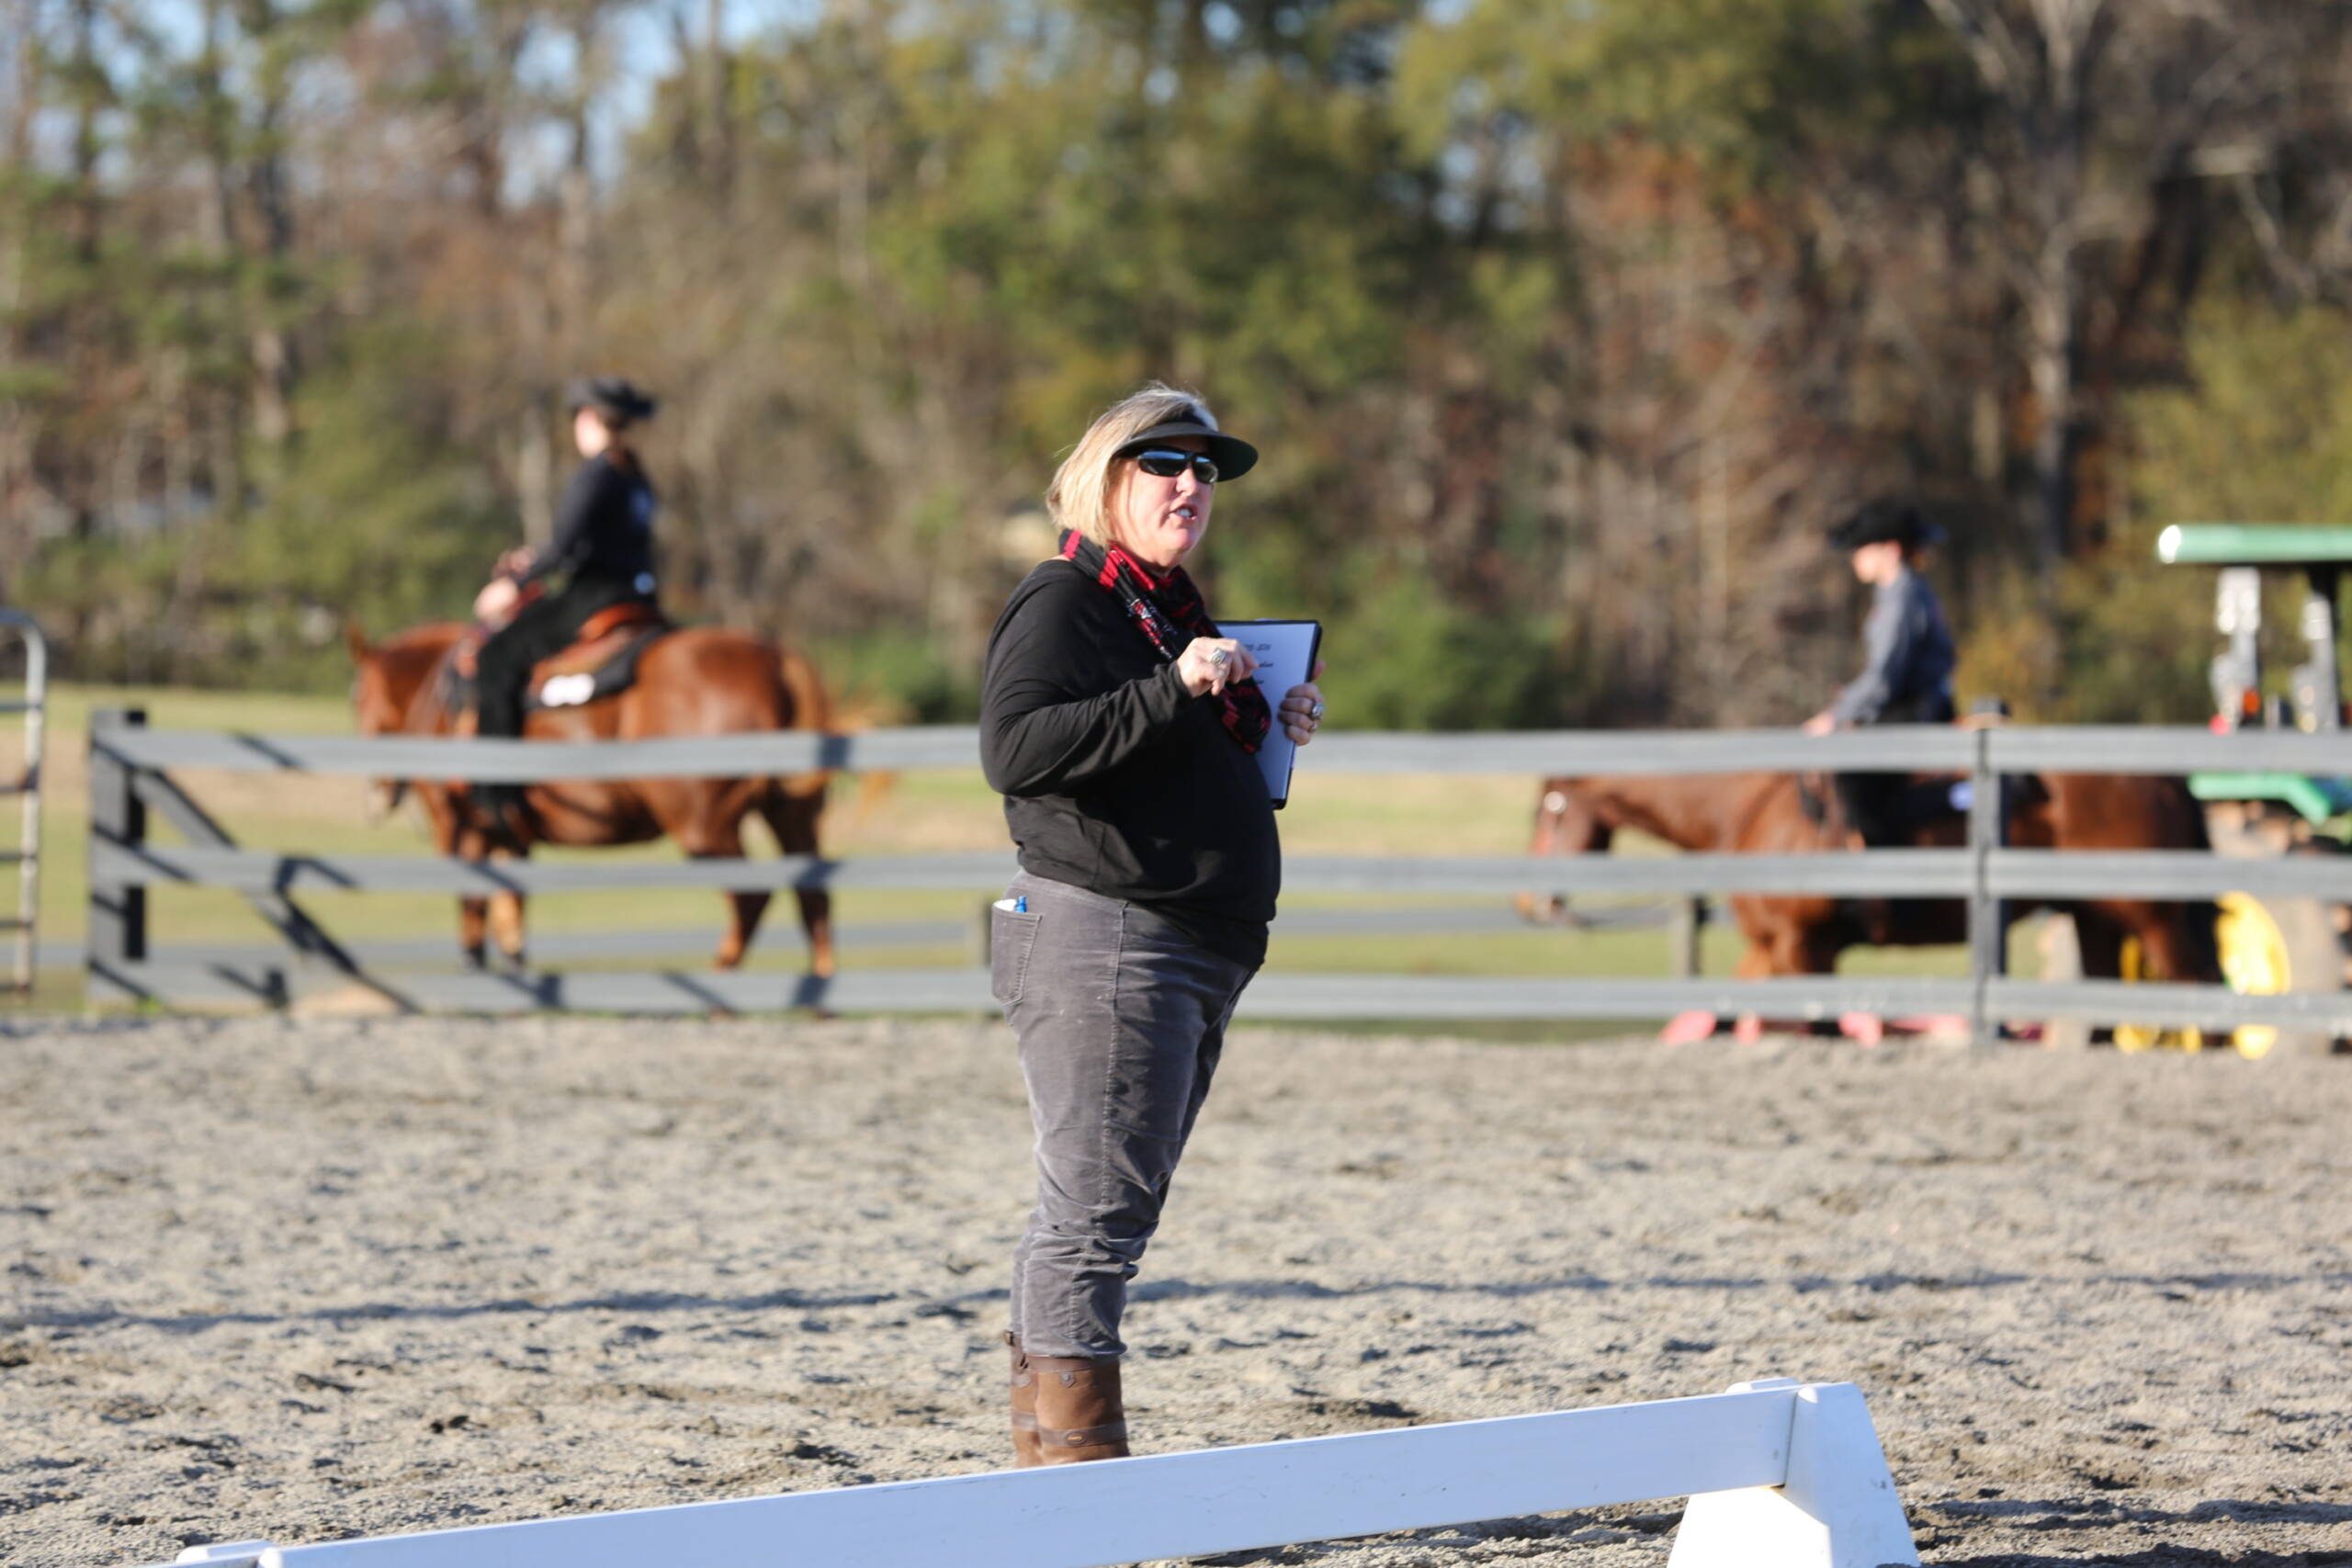 Gamecocks Hold at No. 8 in NCEA Rankings